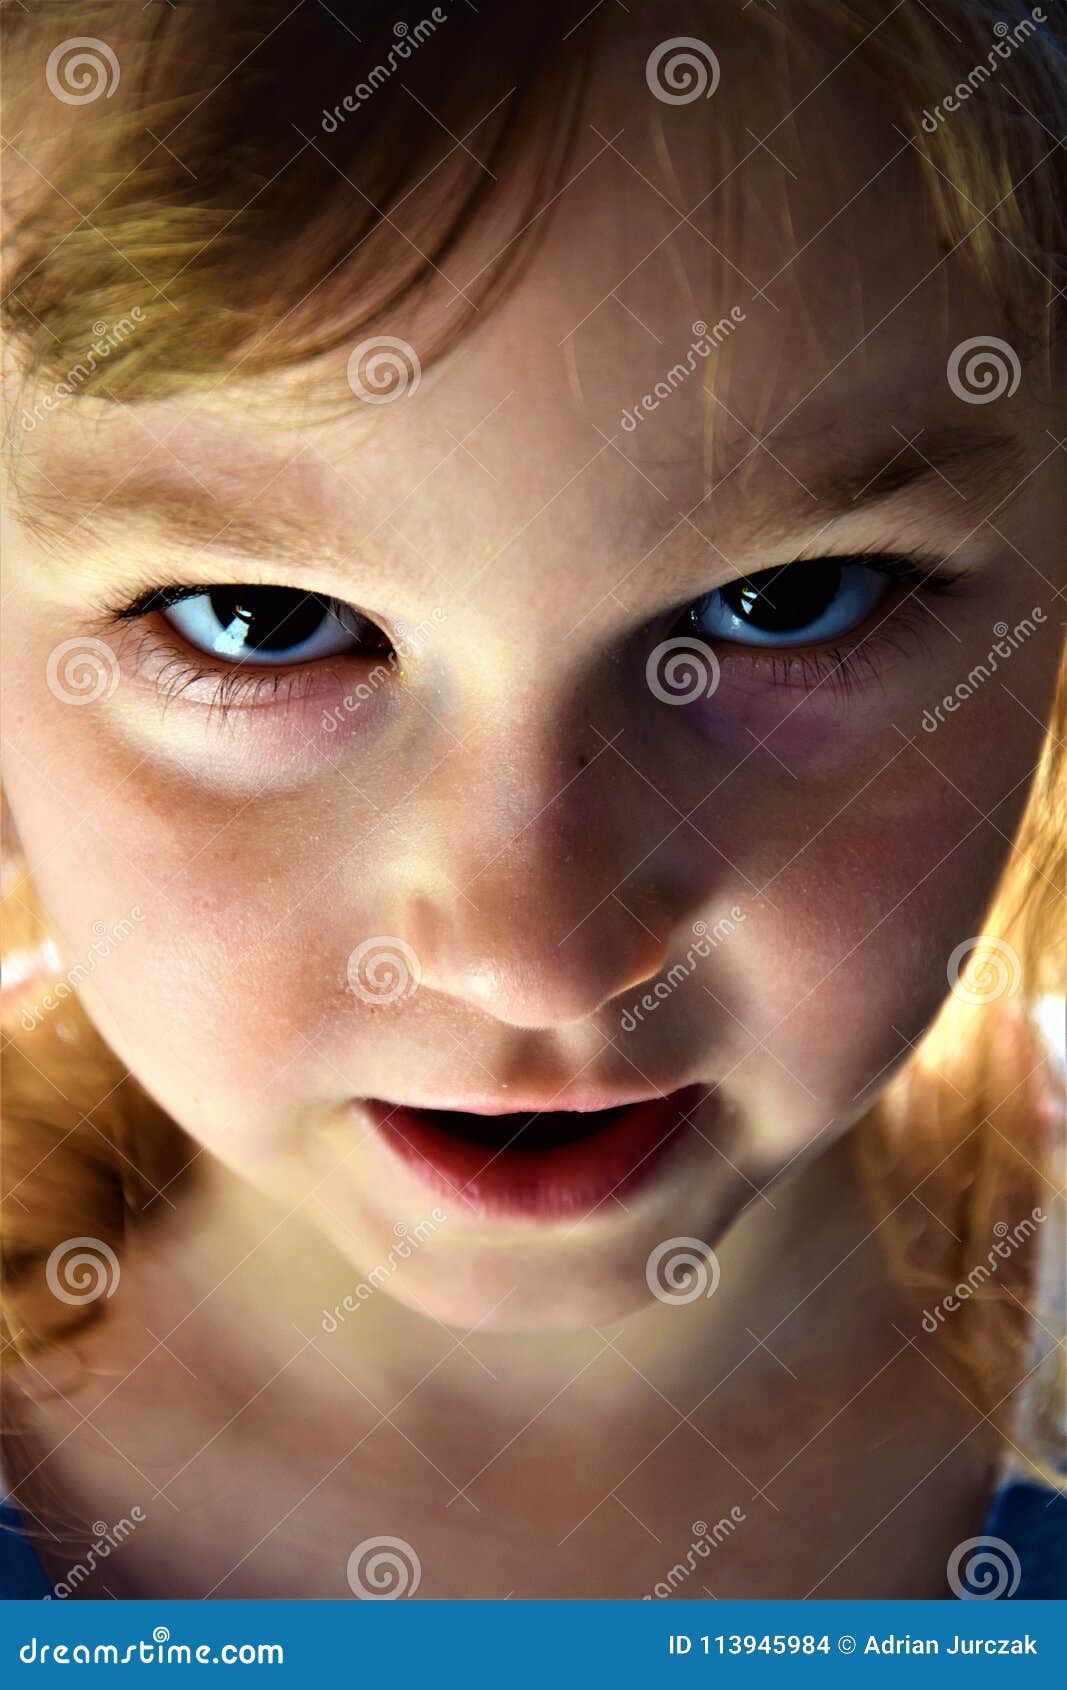 Scary Little Girl Face Portrait Stock Photo Image of lips, scary